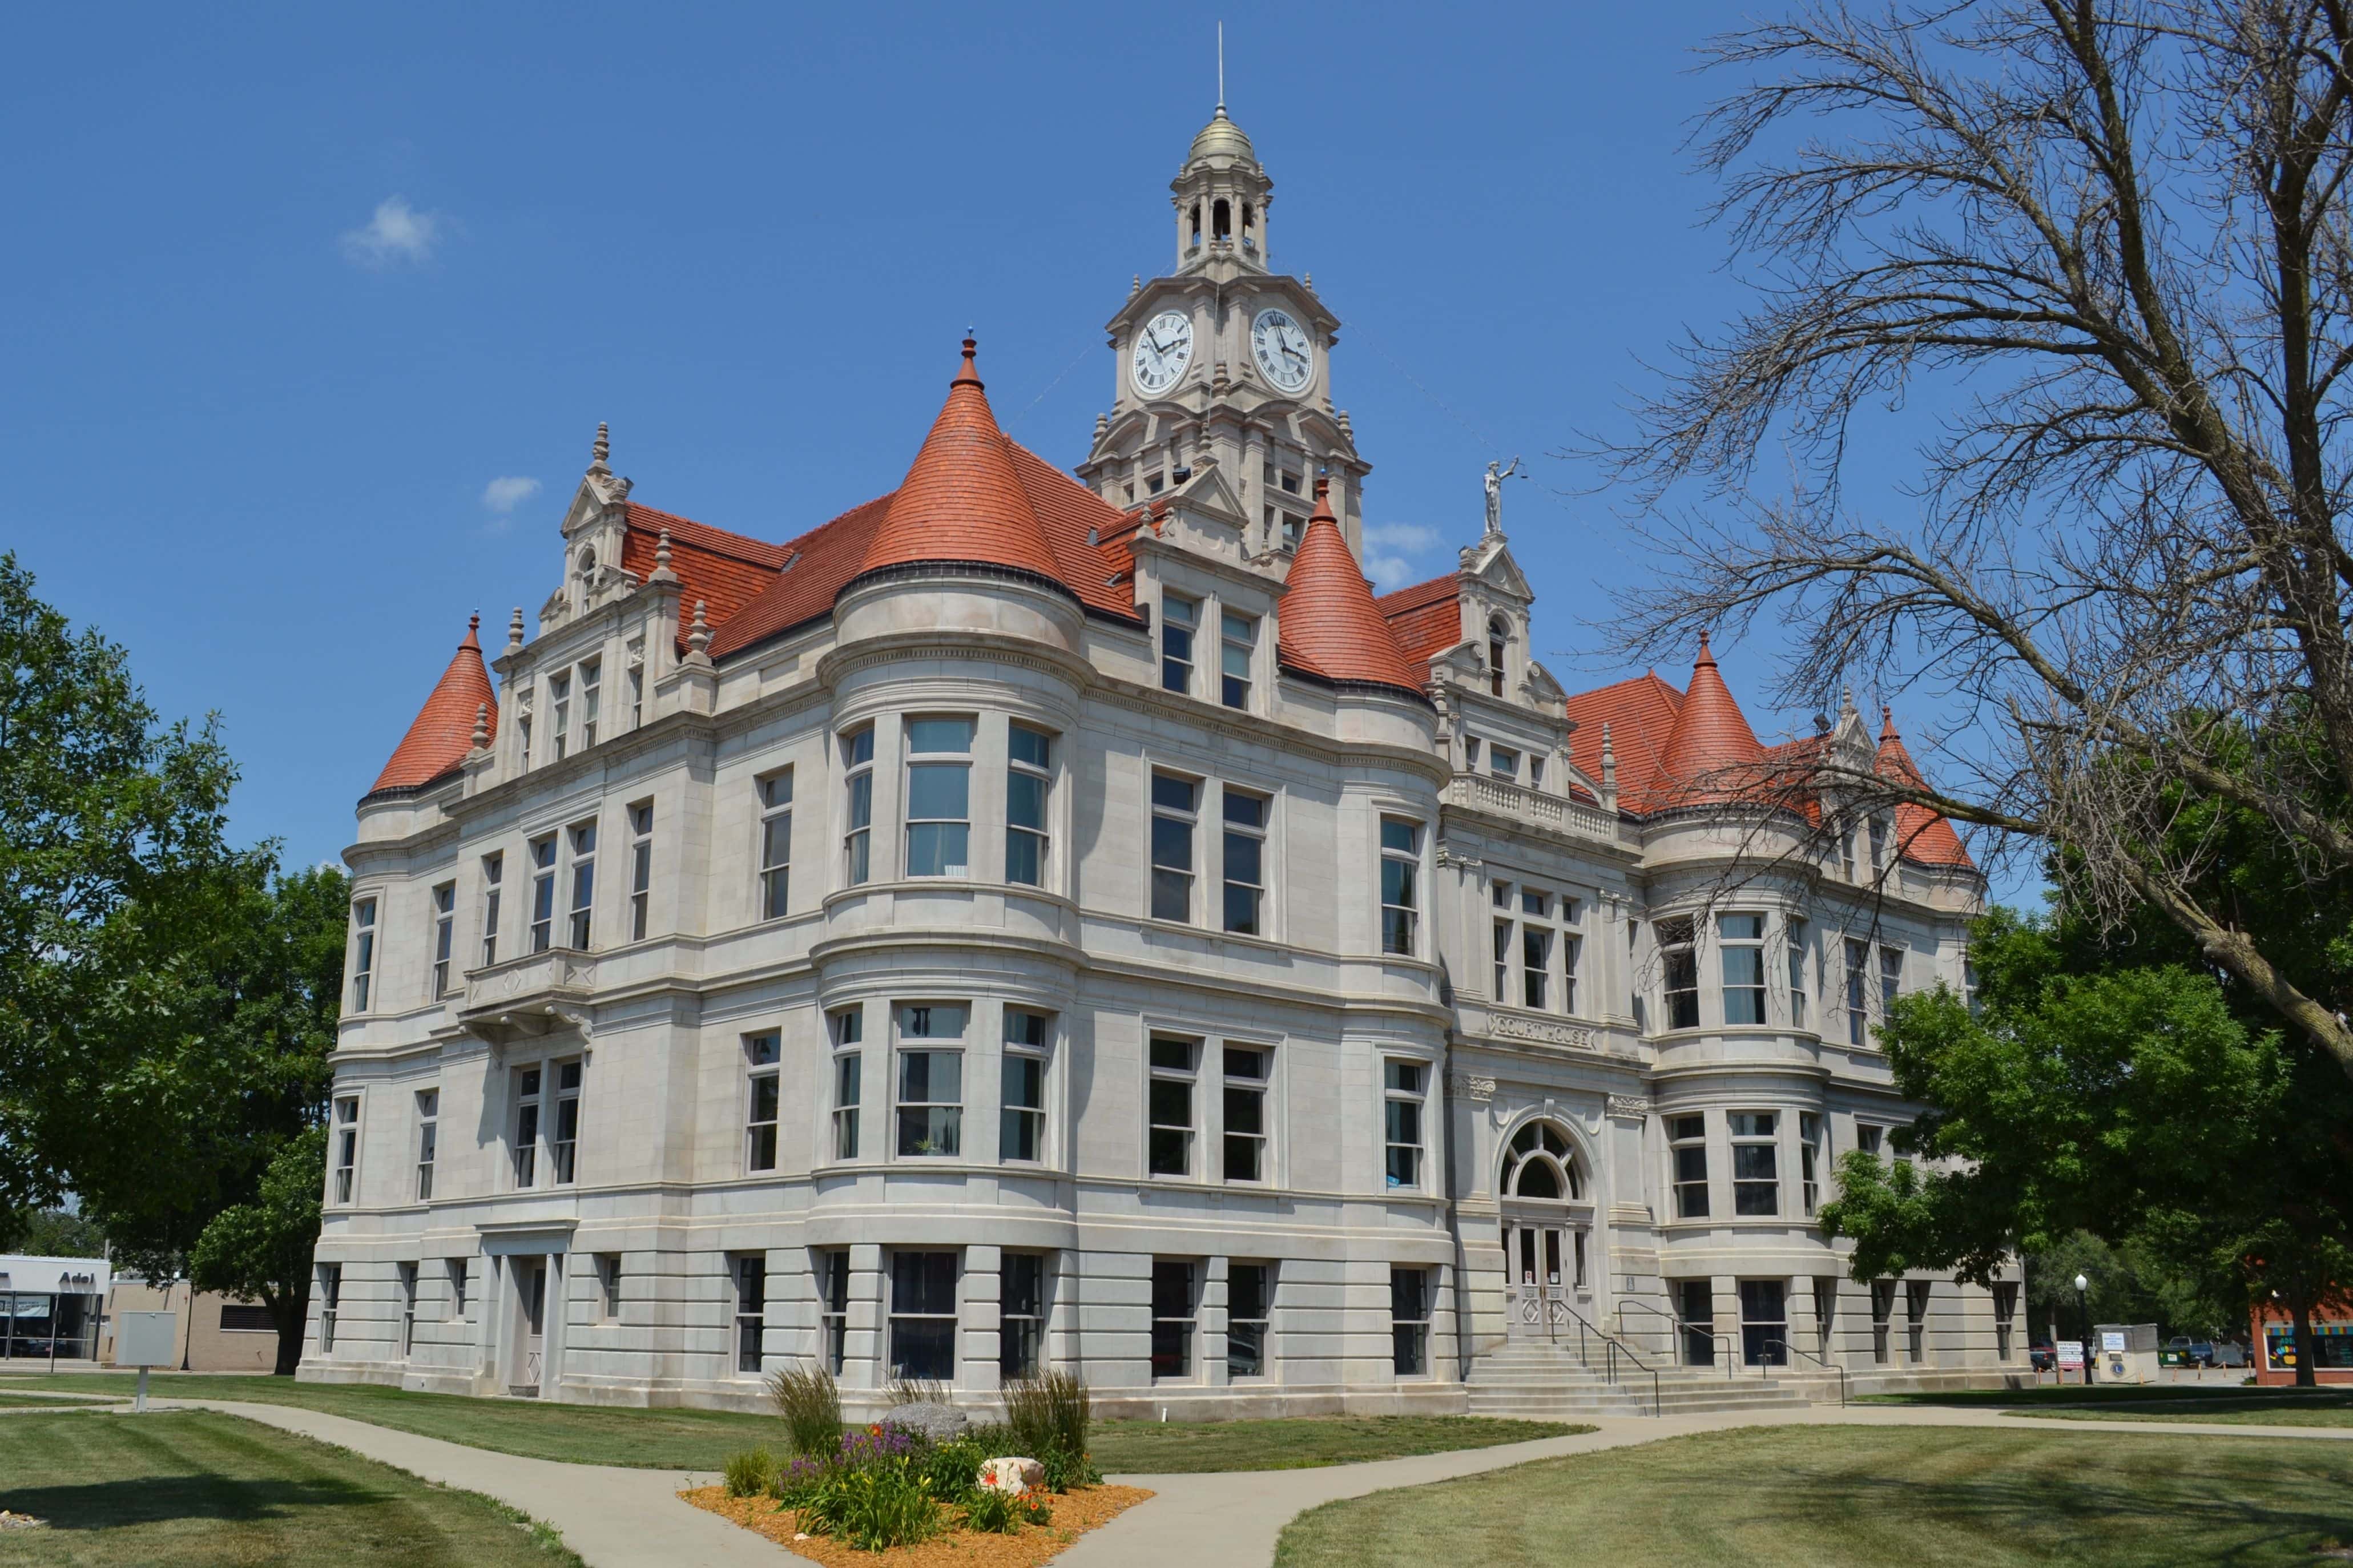 dallas_county_courthouse_adel_iowa_july_4_2013